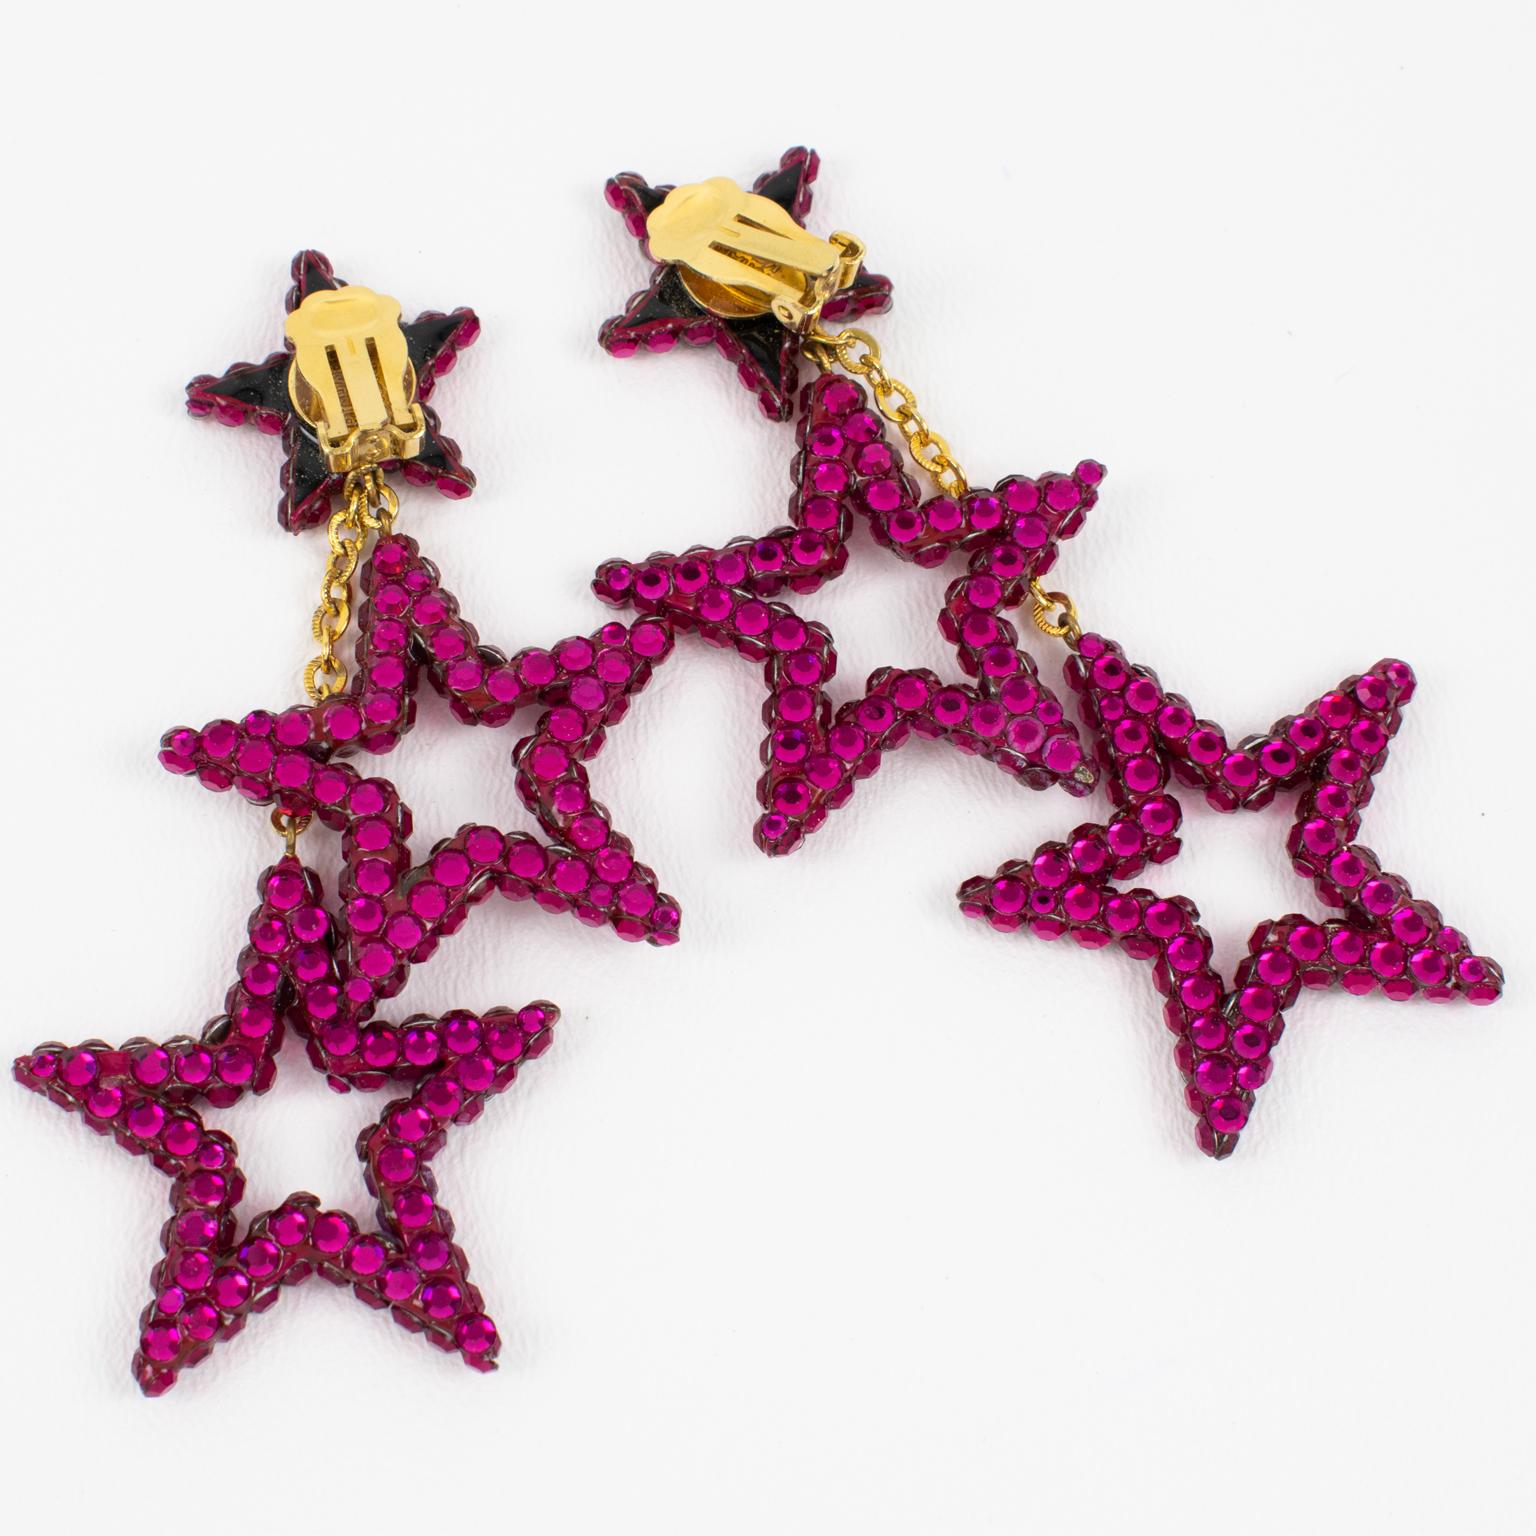 Richard Kerr Hot Pink Fuchsia Jeweled Dangling Star Clip Earrings In Excellent Condition For Sale In Atlanta, GA